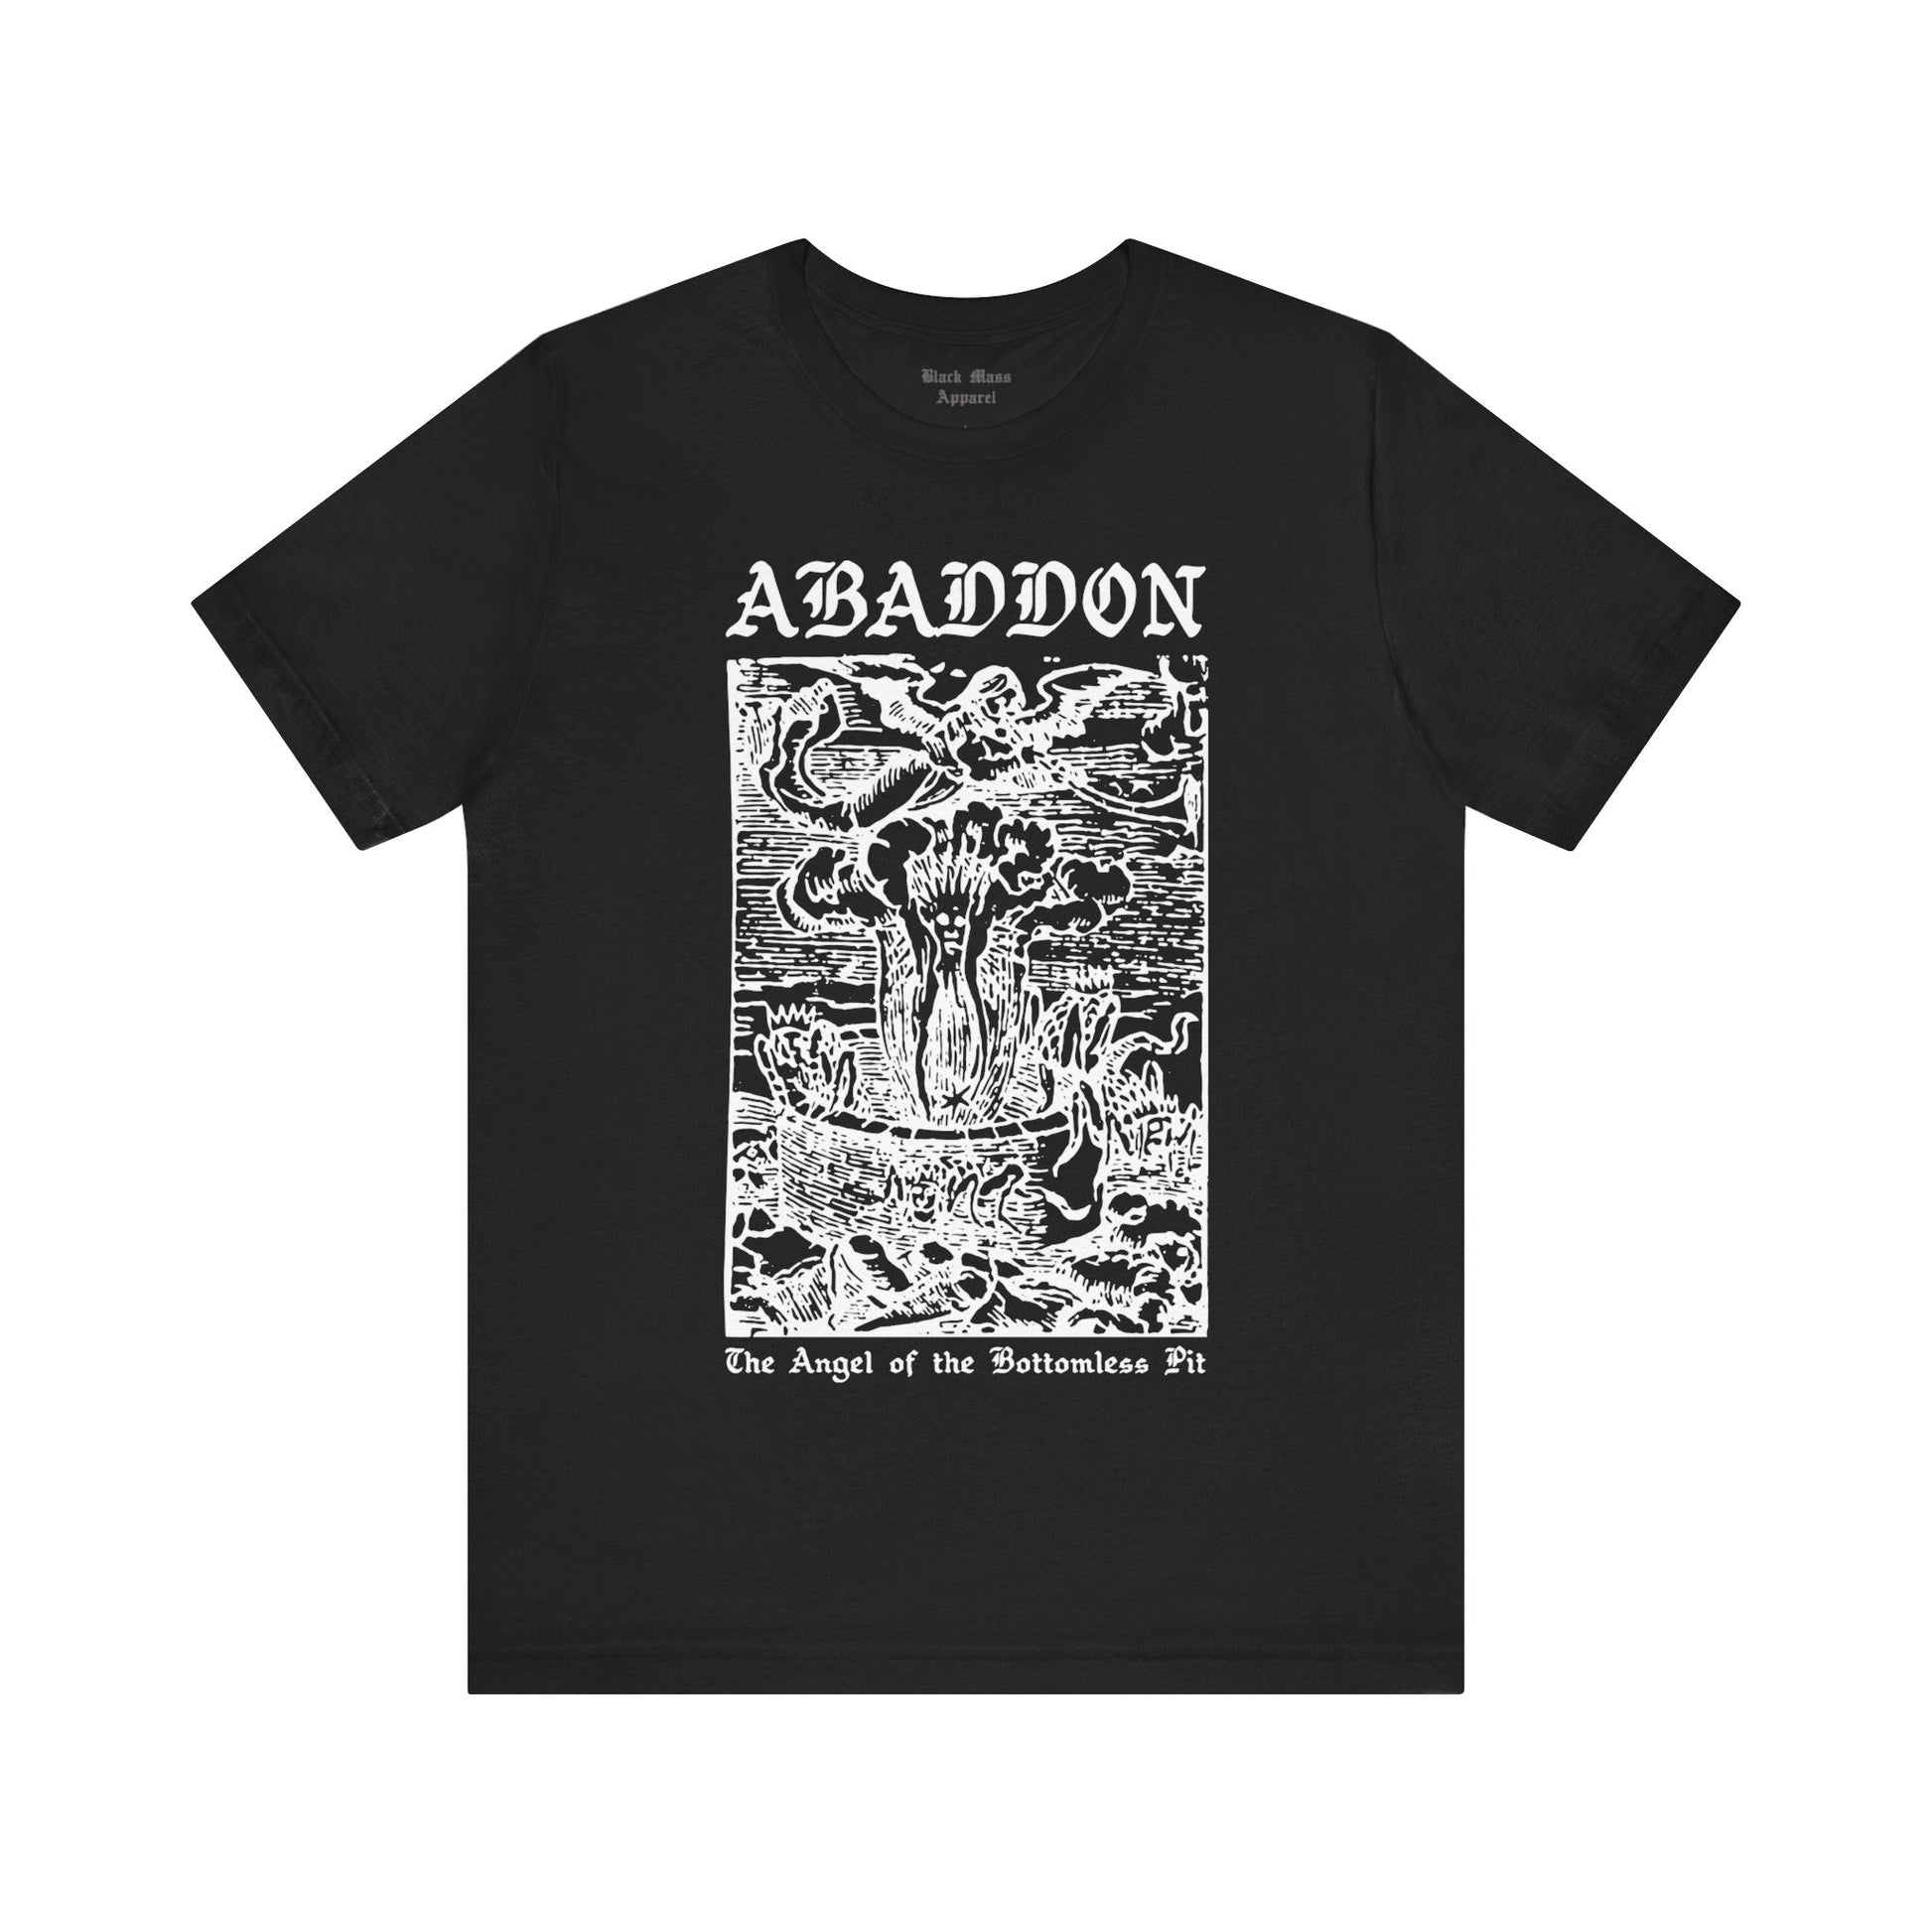 Abaddon - The Angel of the Bottomless Pit - Black Mass Apparel - T-Shirt